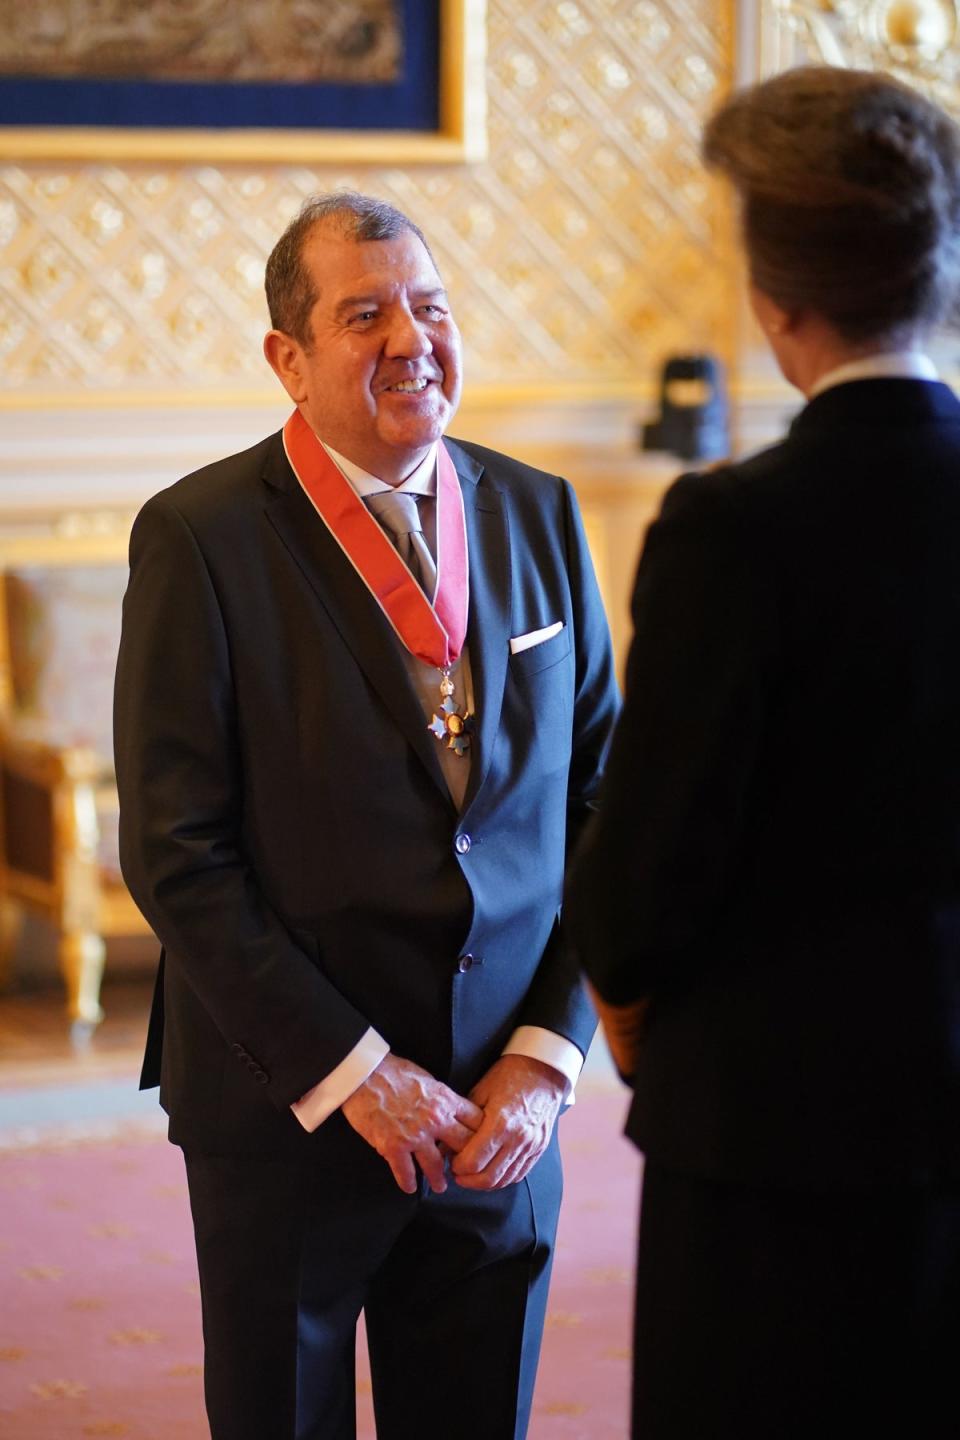 Ivor Bolton, from London, Conductor, is made a Commander of the Order of the British Empire by the Princess Royal at Windsor Castle (PA)